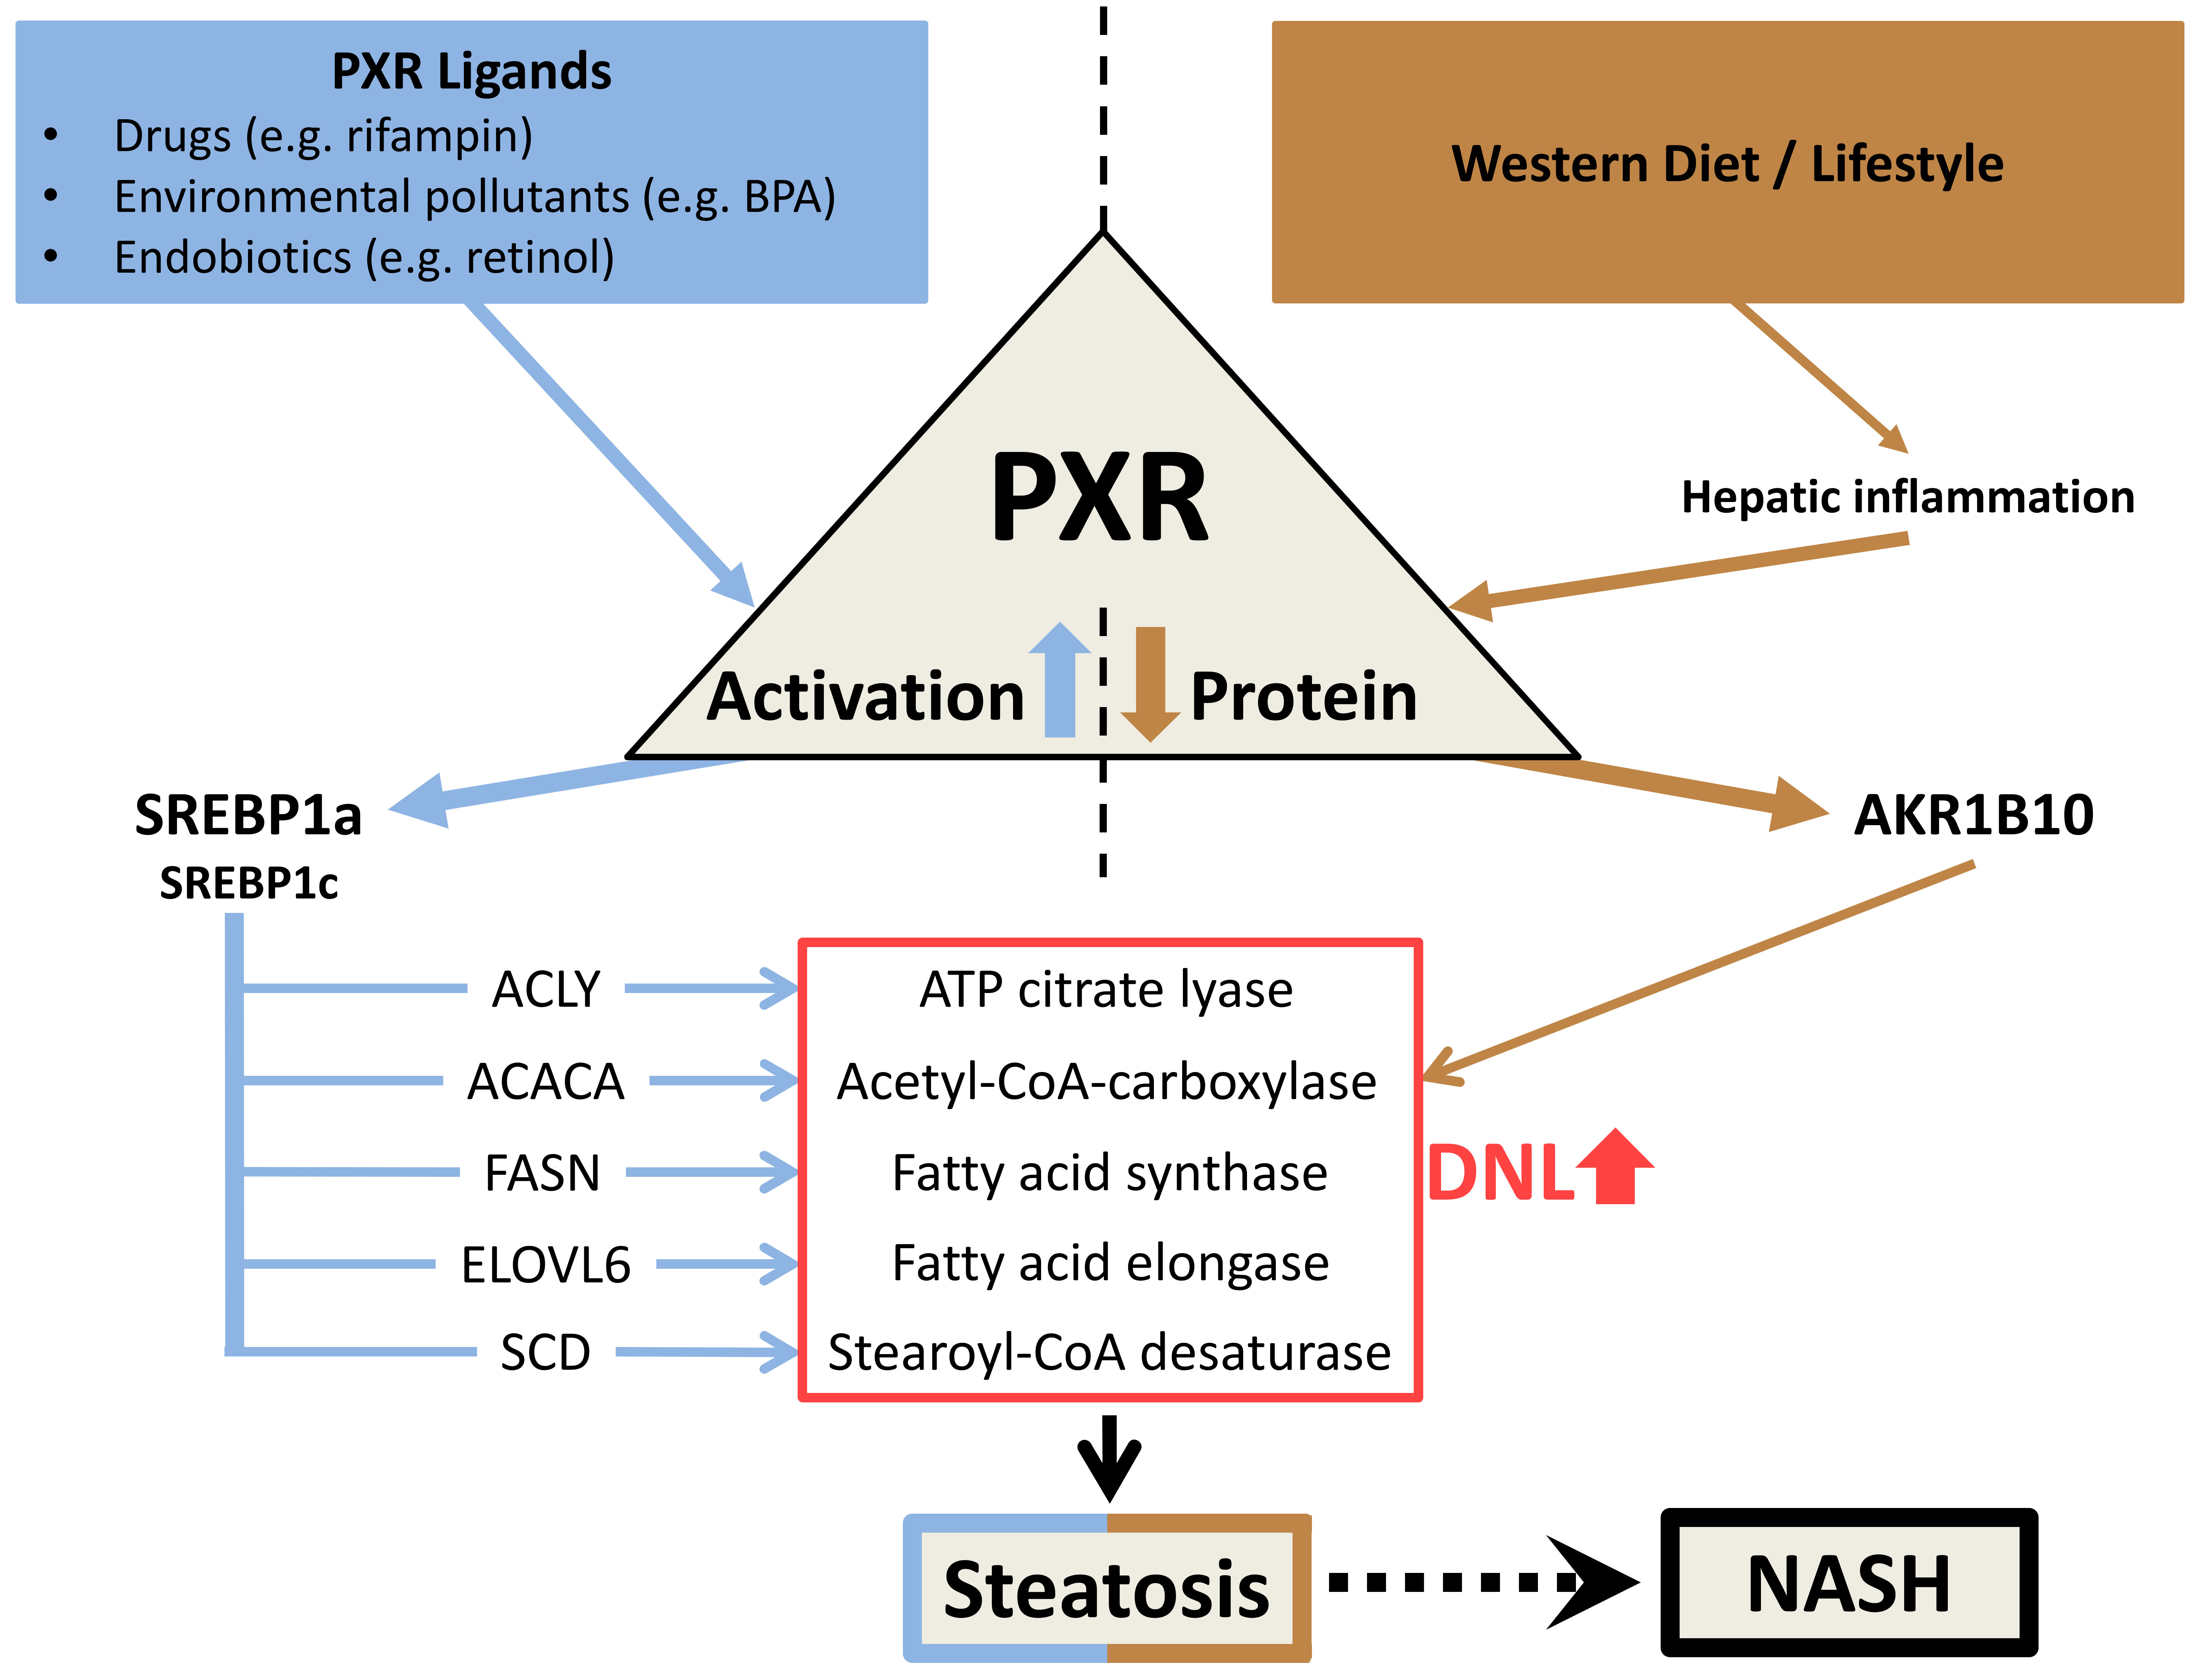 Figure 2: Scheme of the potential dual role of PXR in the development of human hepatic steatosis. (for more details, please scroll down)